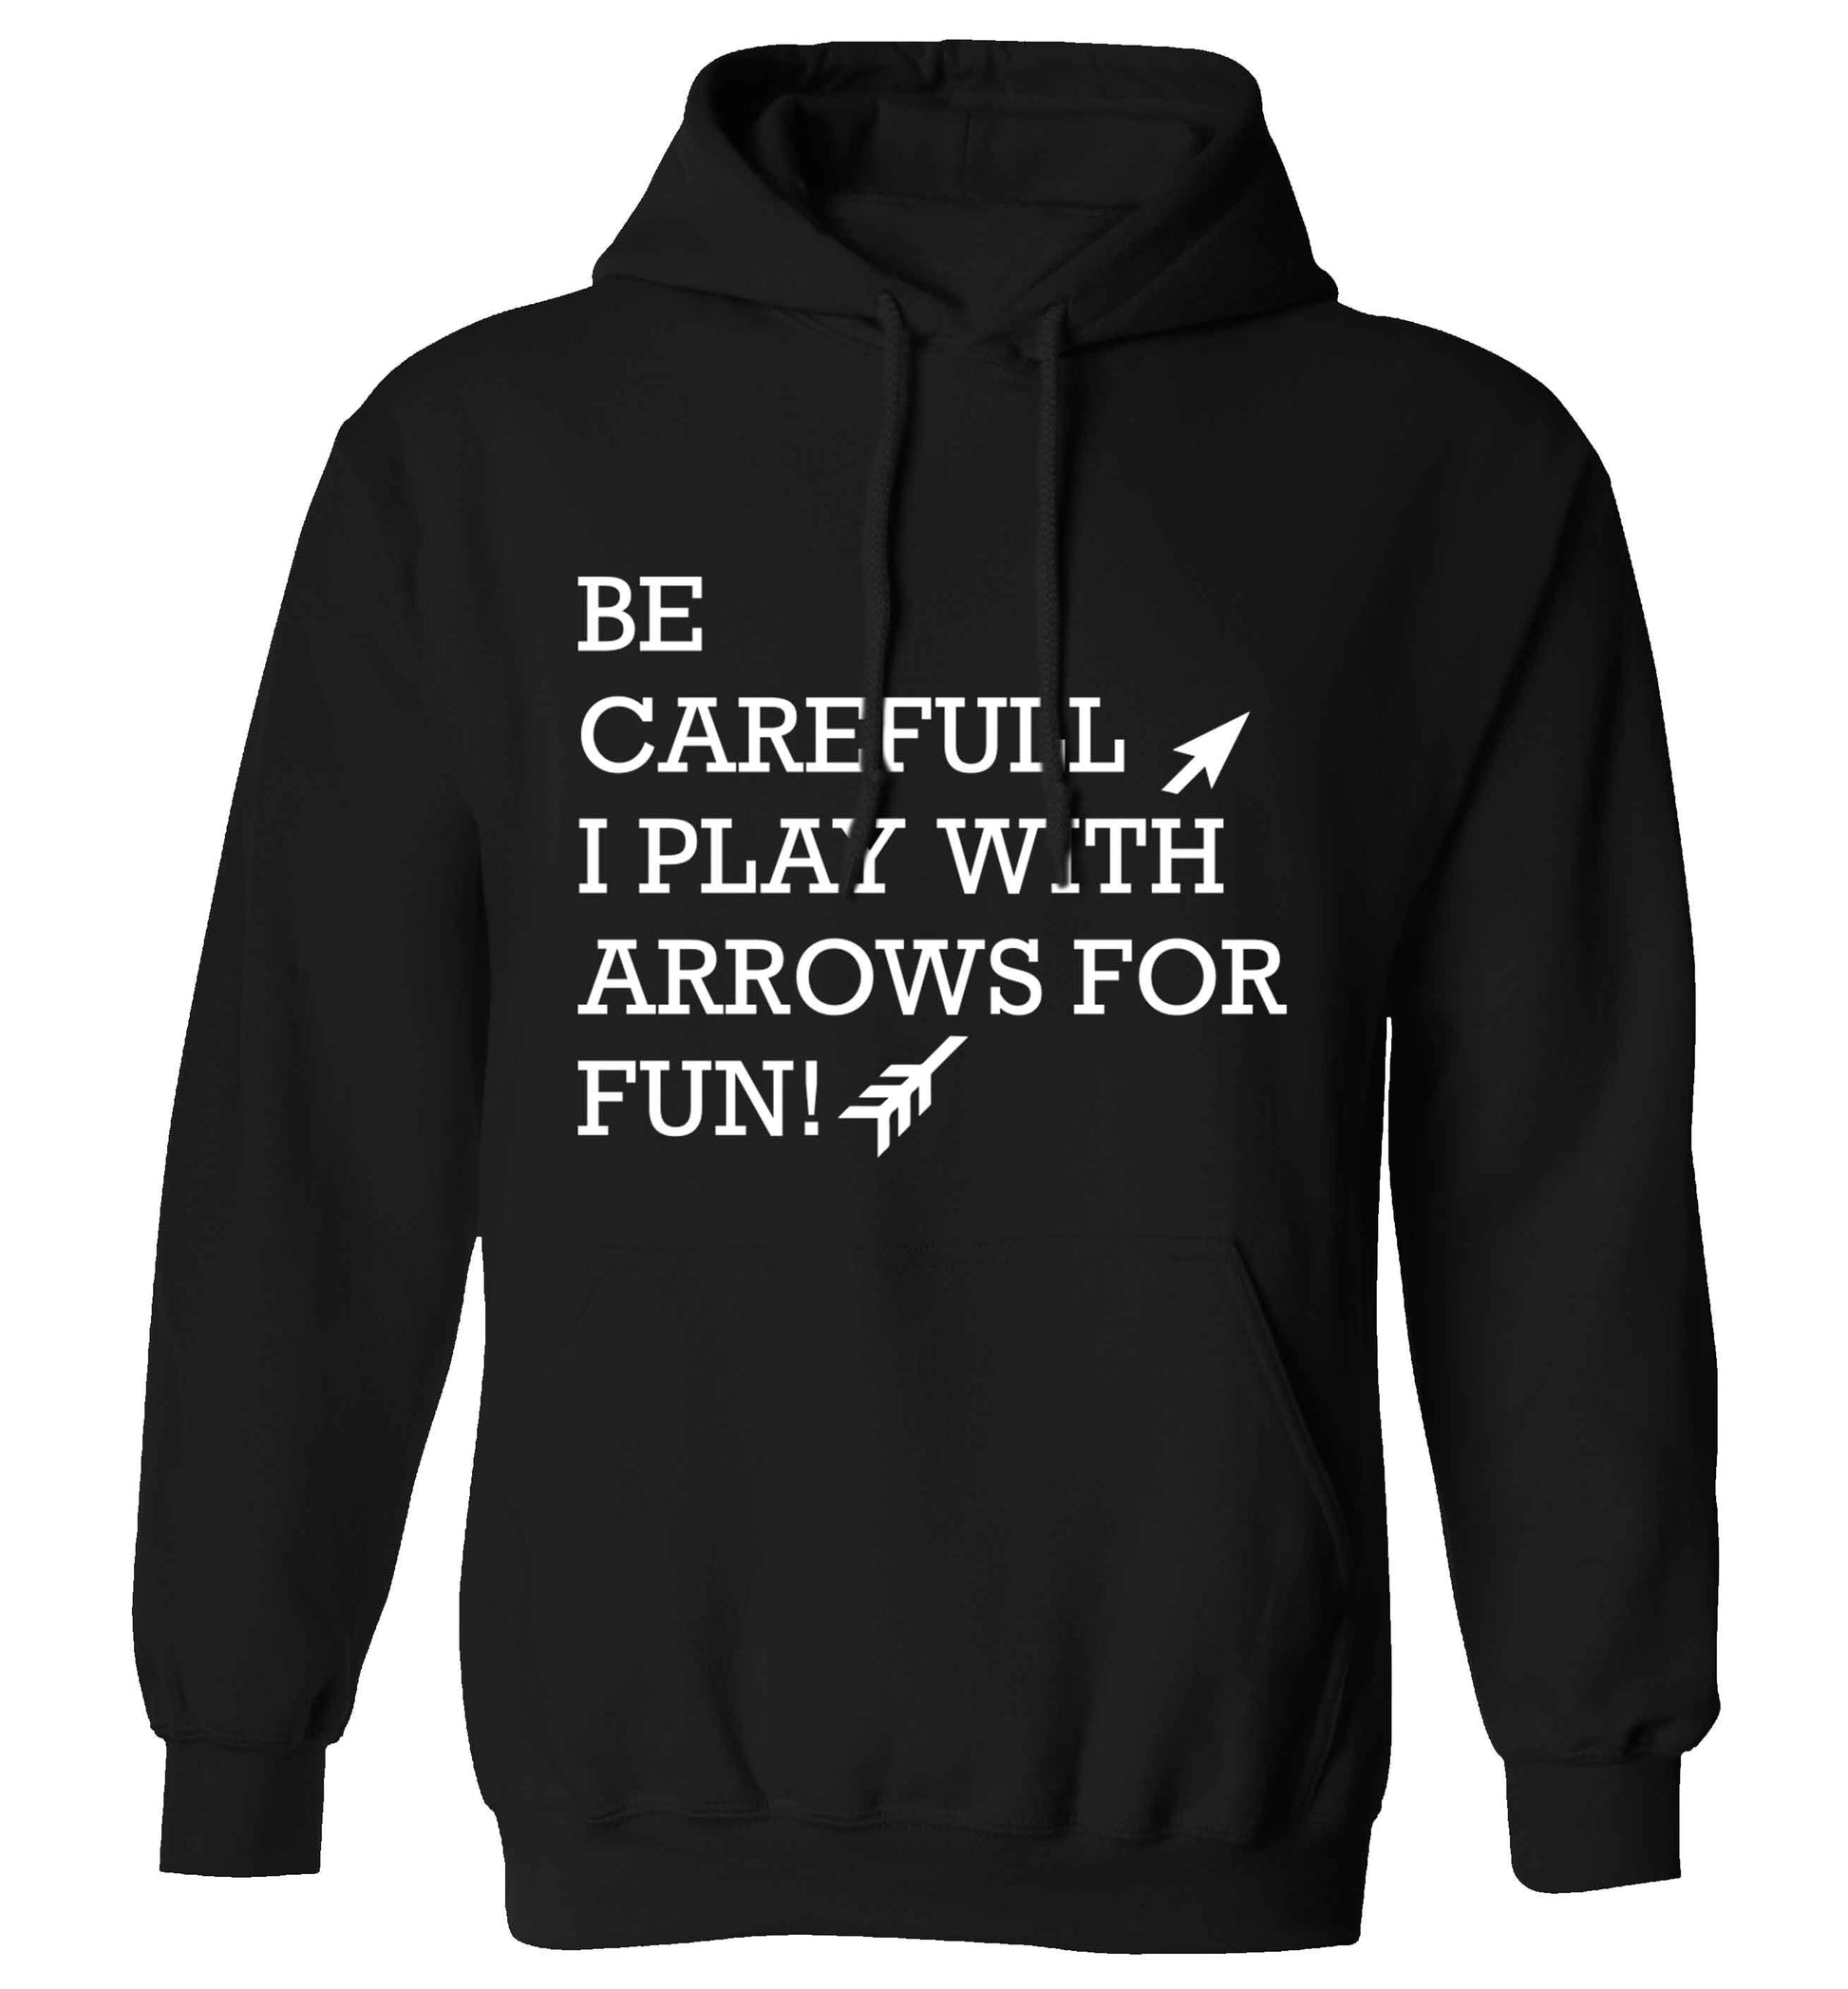 Be carefull I play with arrows for fun adults unisex black hoodie 2XL